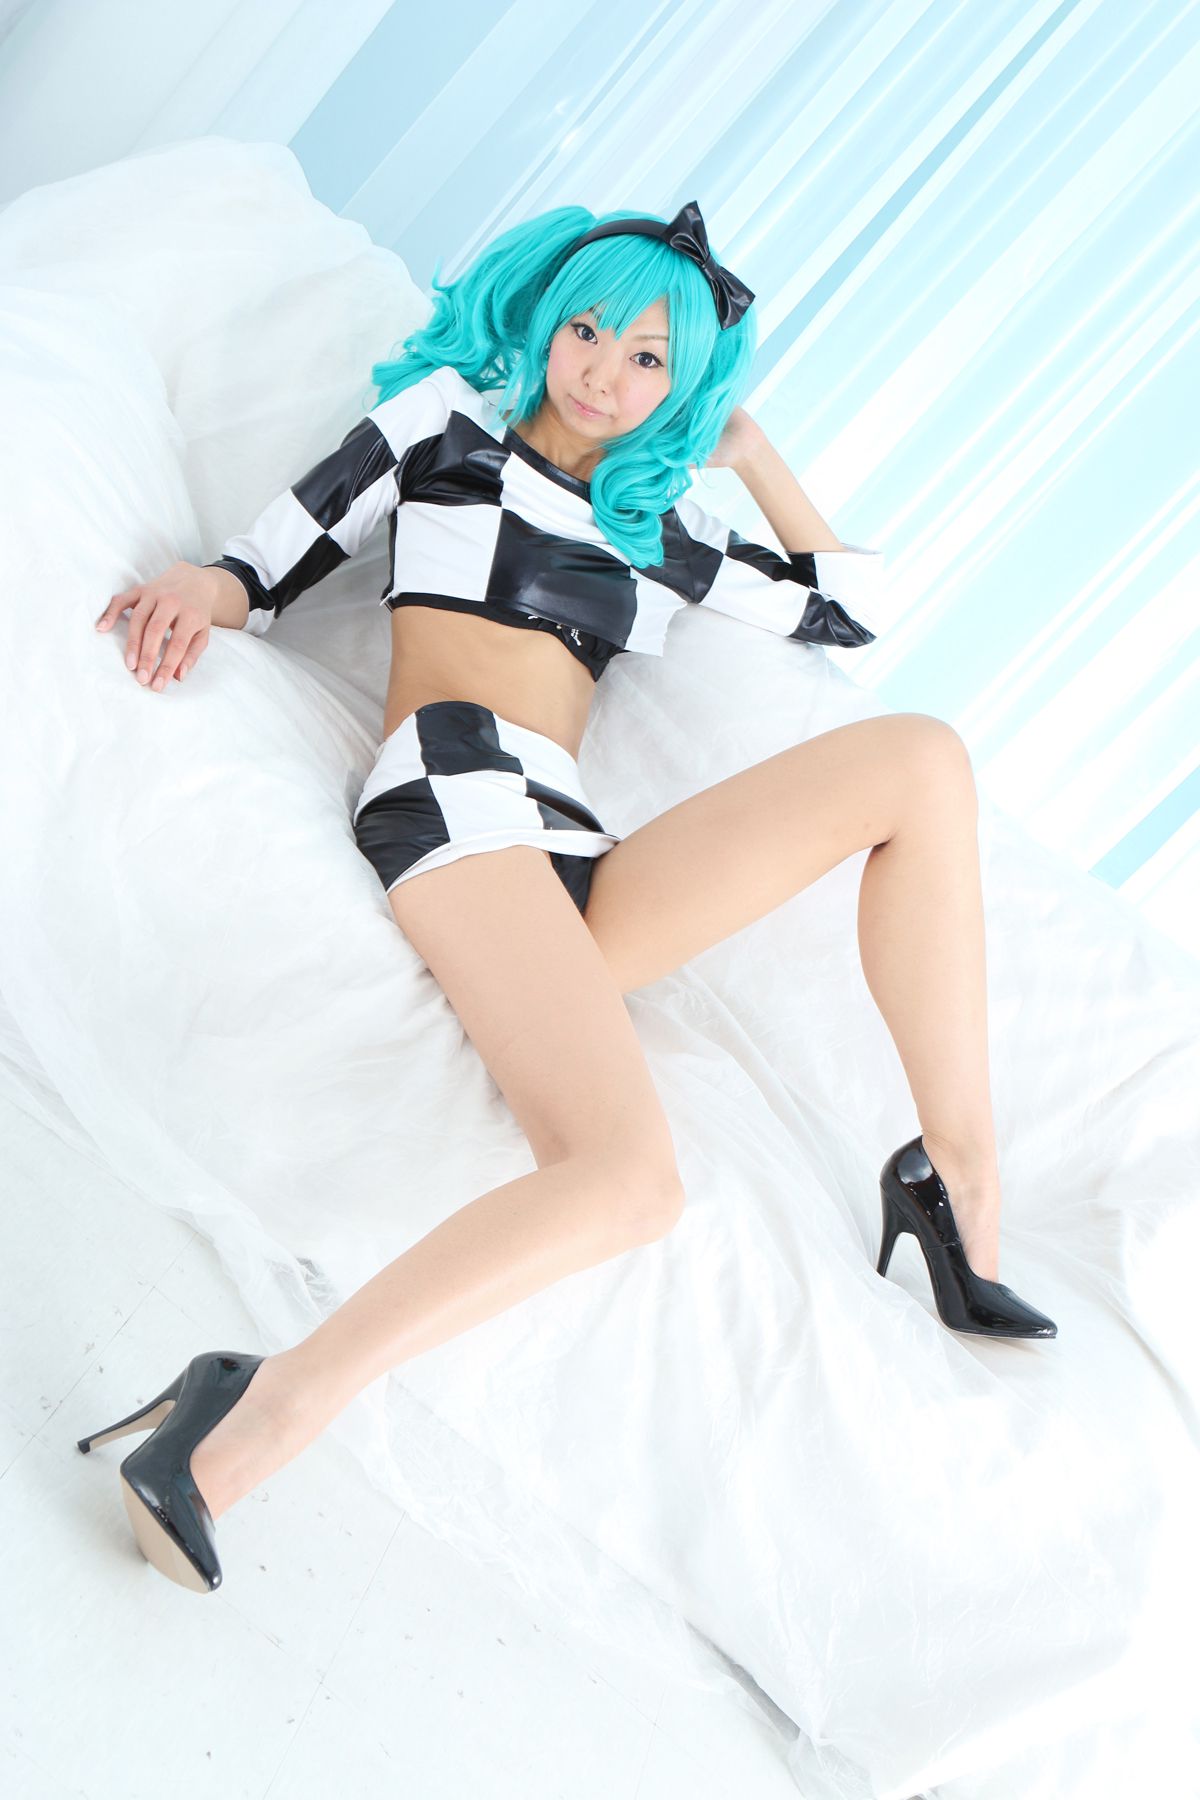 taotuhome[Cosplay套图] New Hatsune Miku from Vocaloid - So Sexy第7张